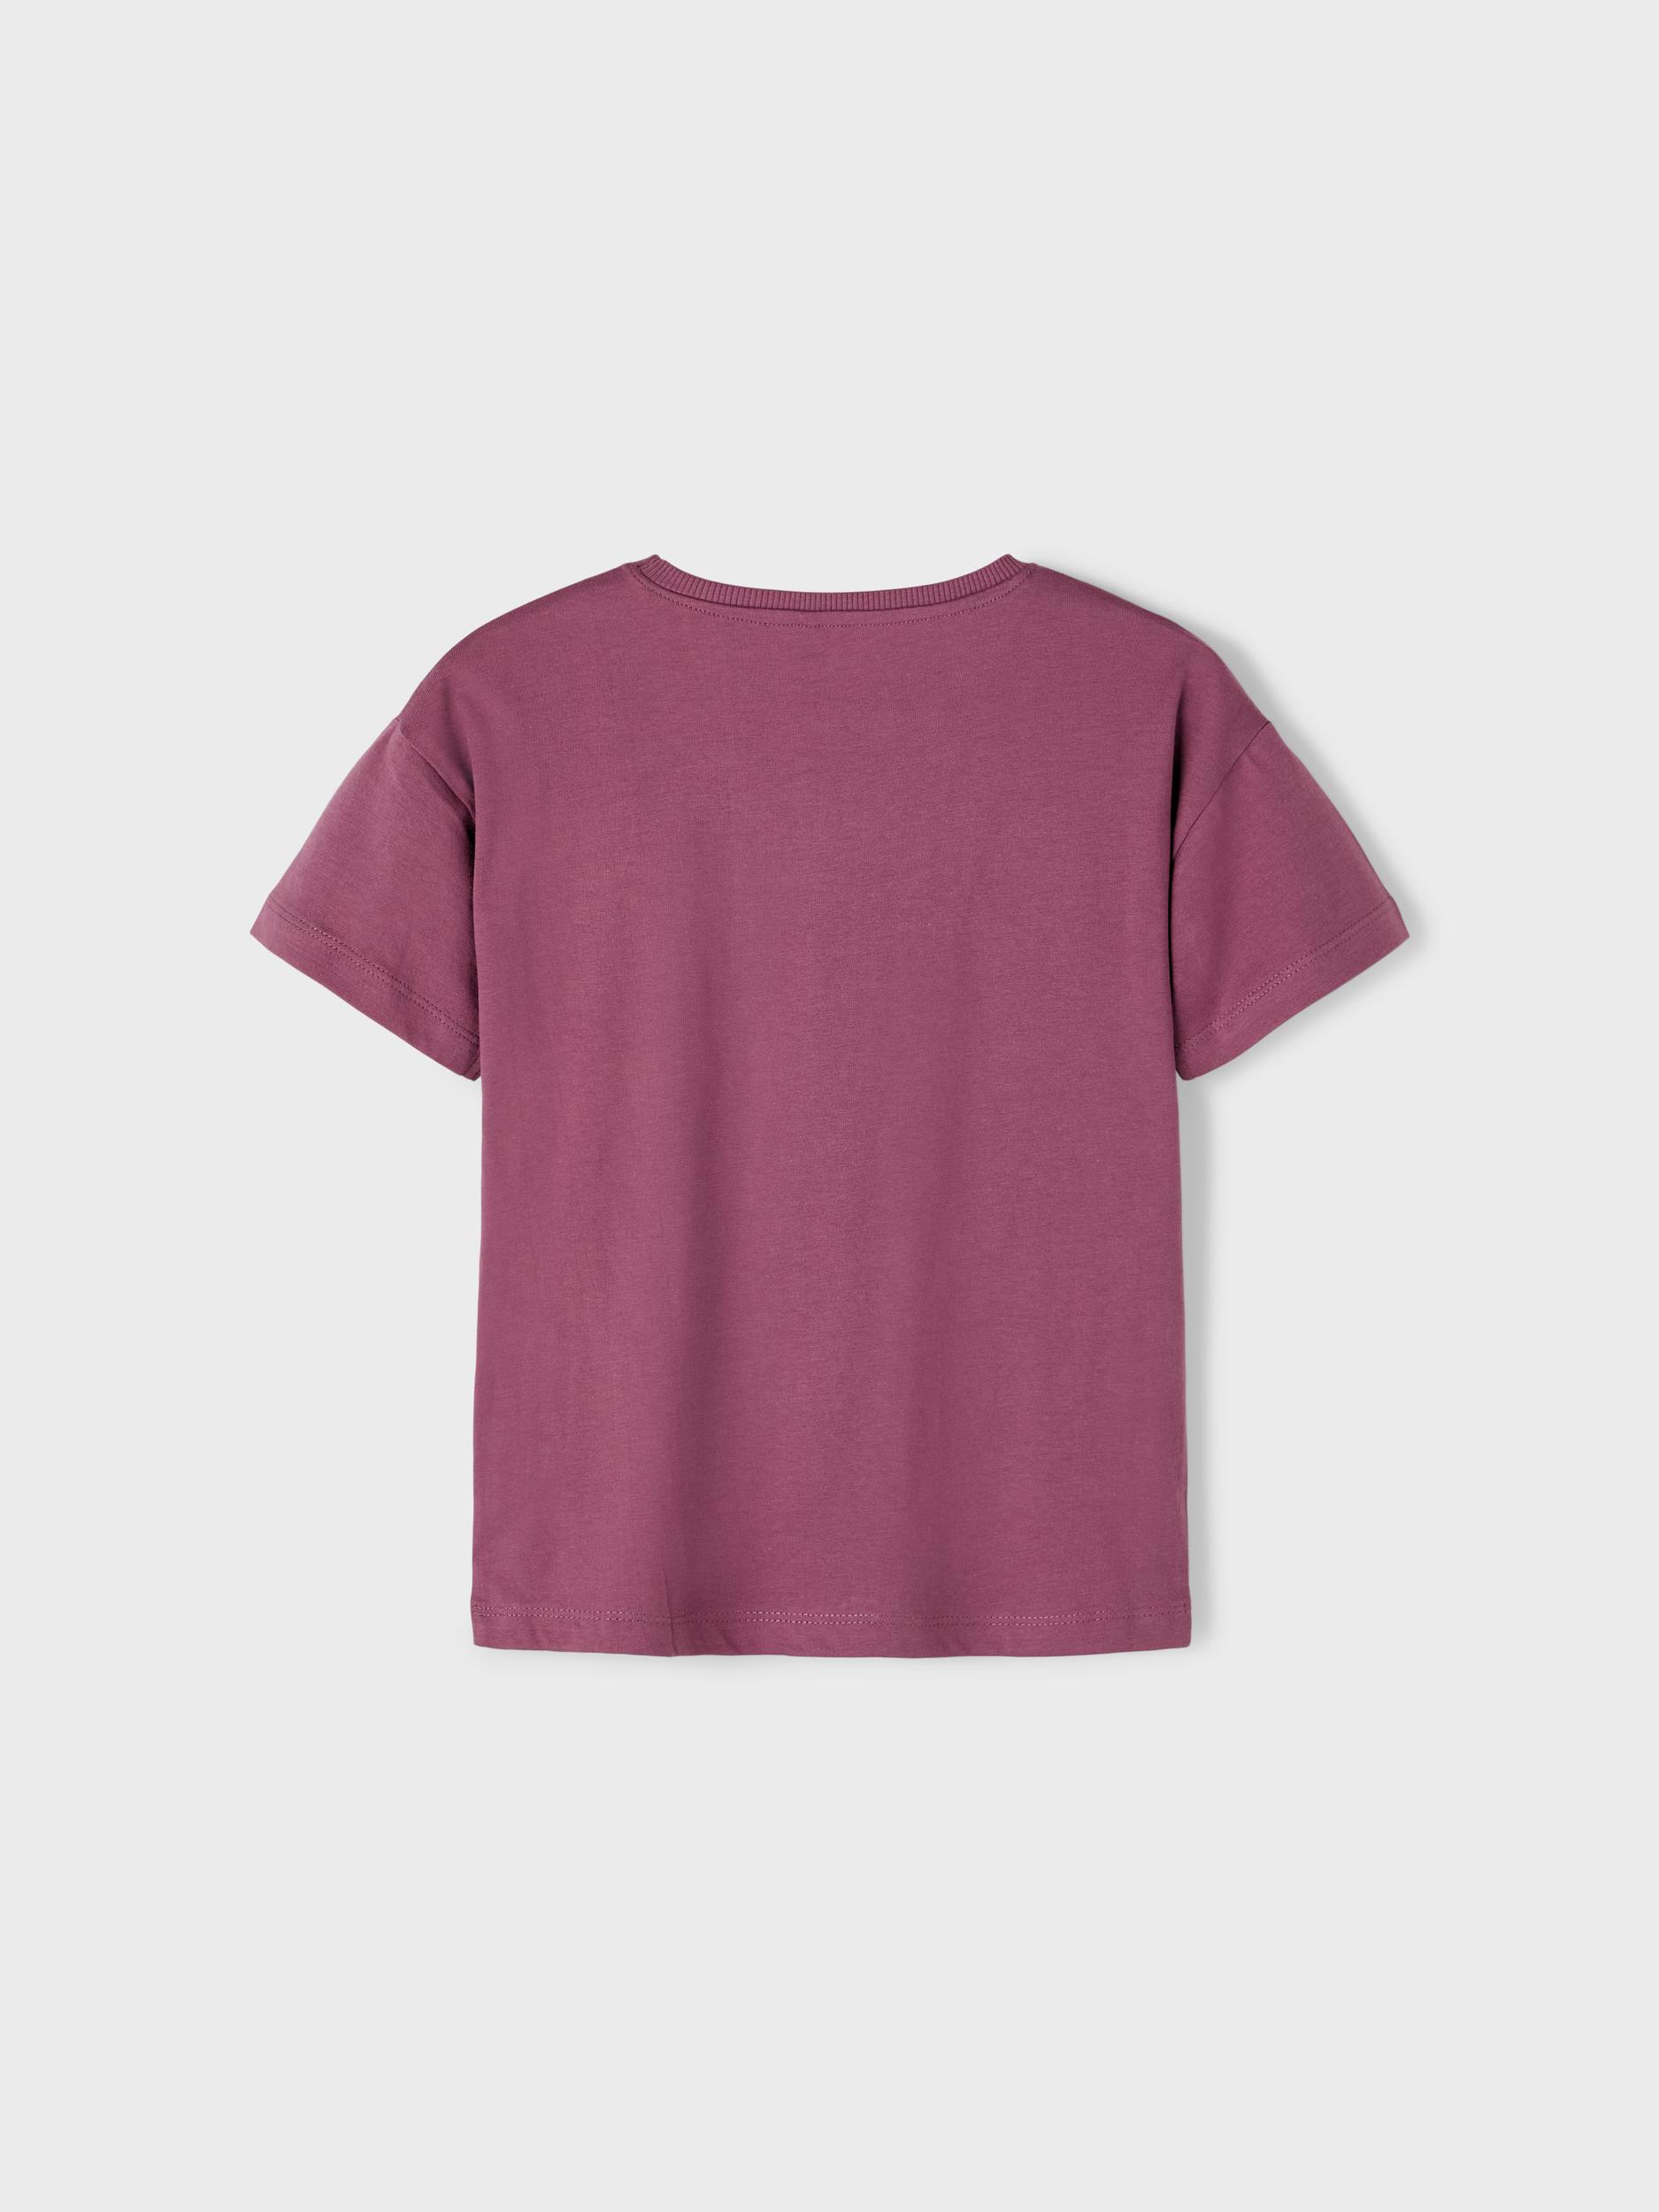  Tully T-Shirt, Chrushed Berry, 116 cm